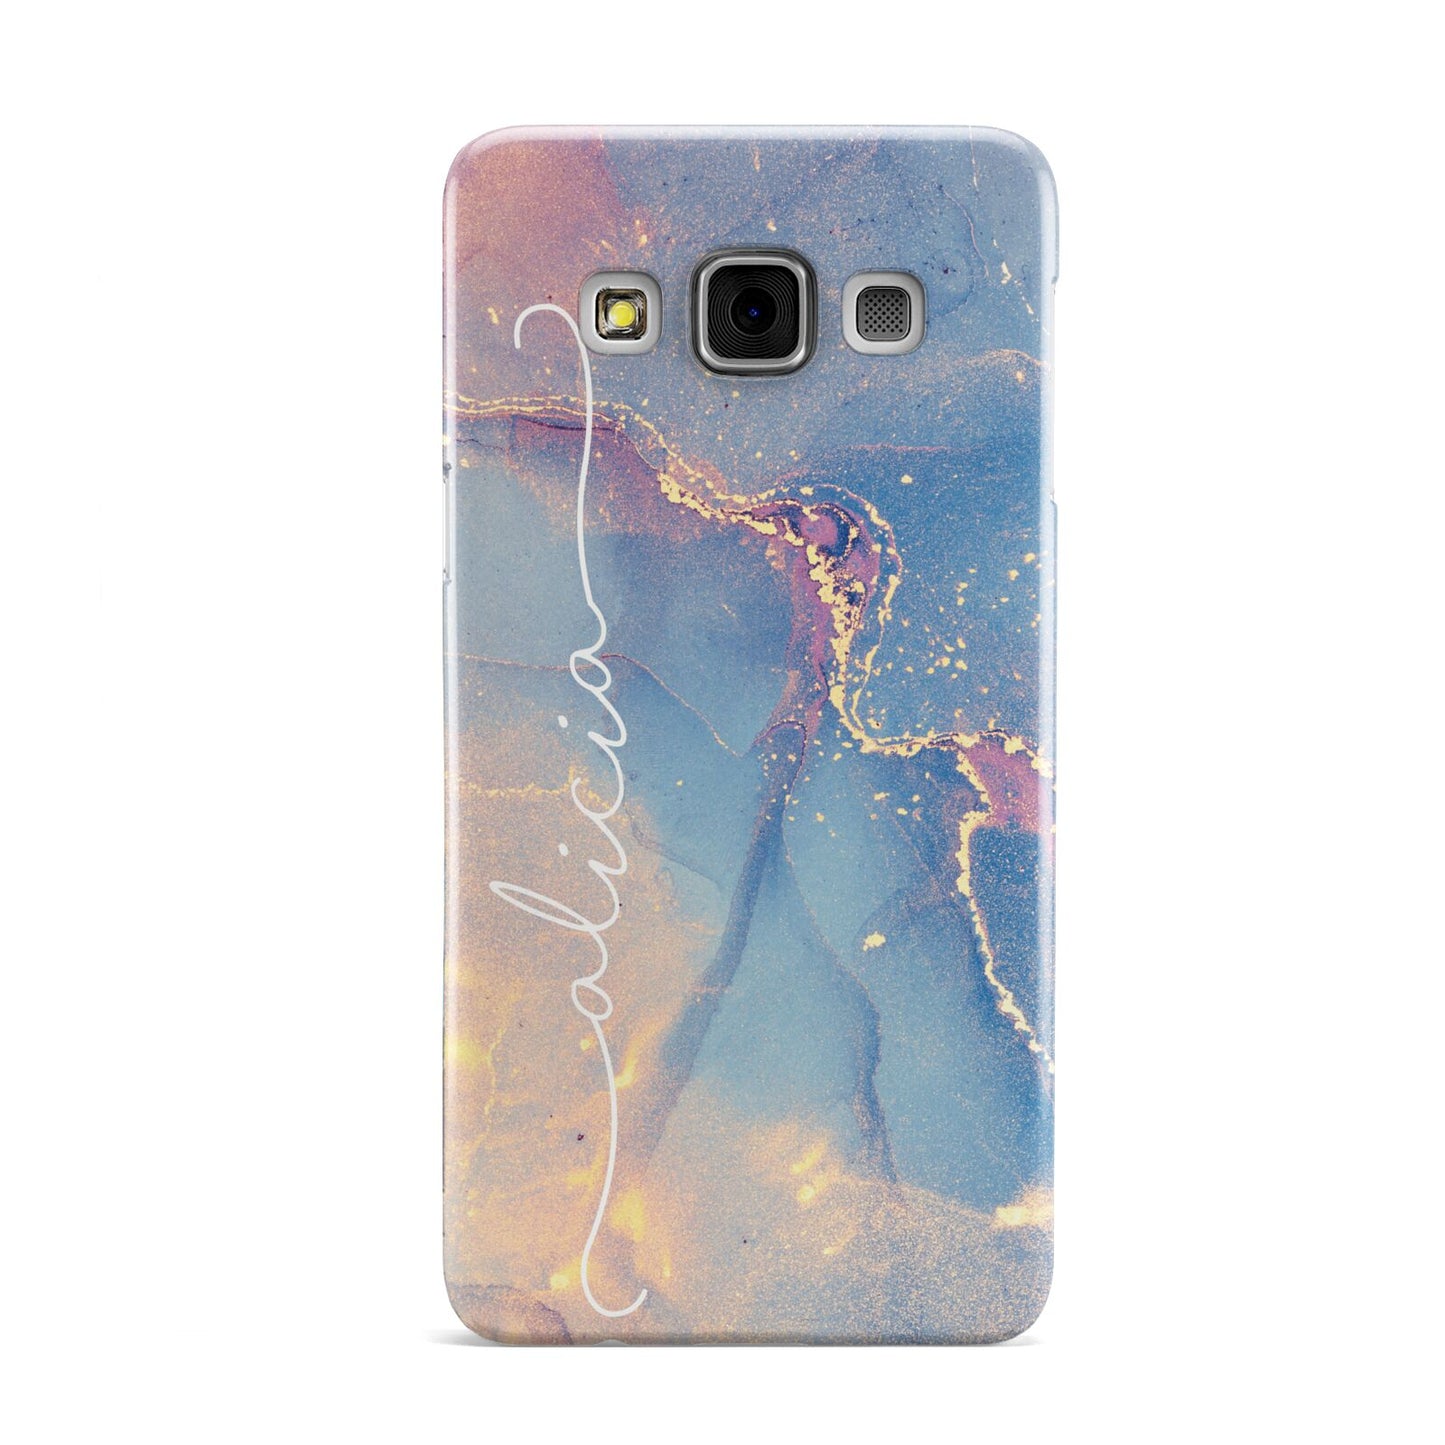 Blue and Pink Marble Samsung Galaxy A3 Case